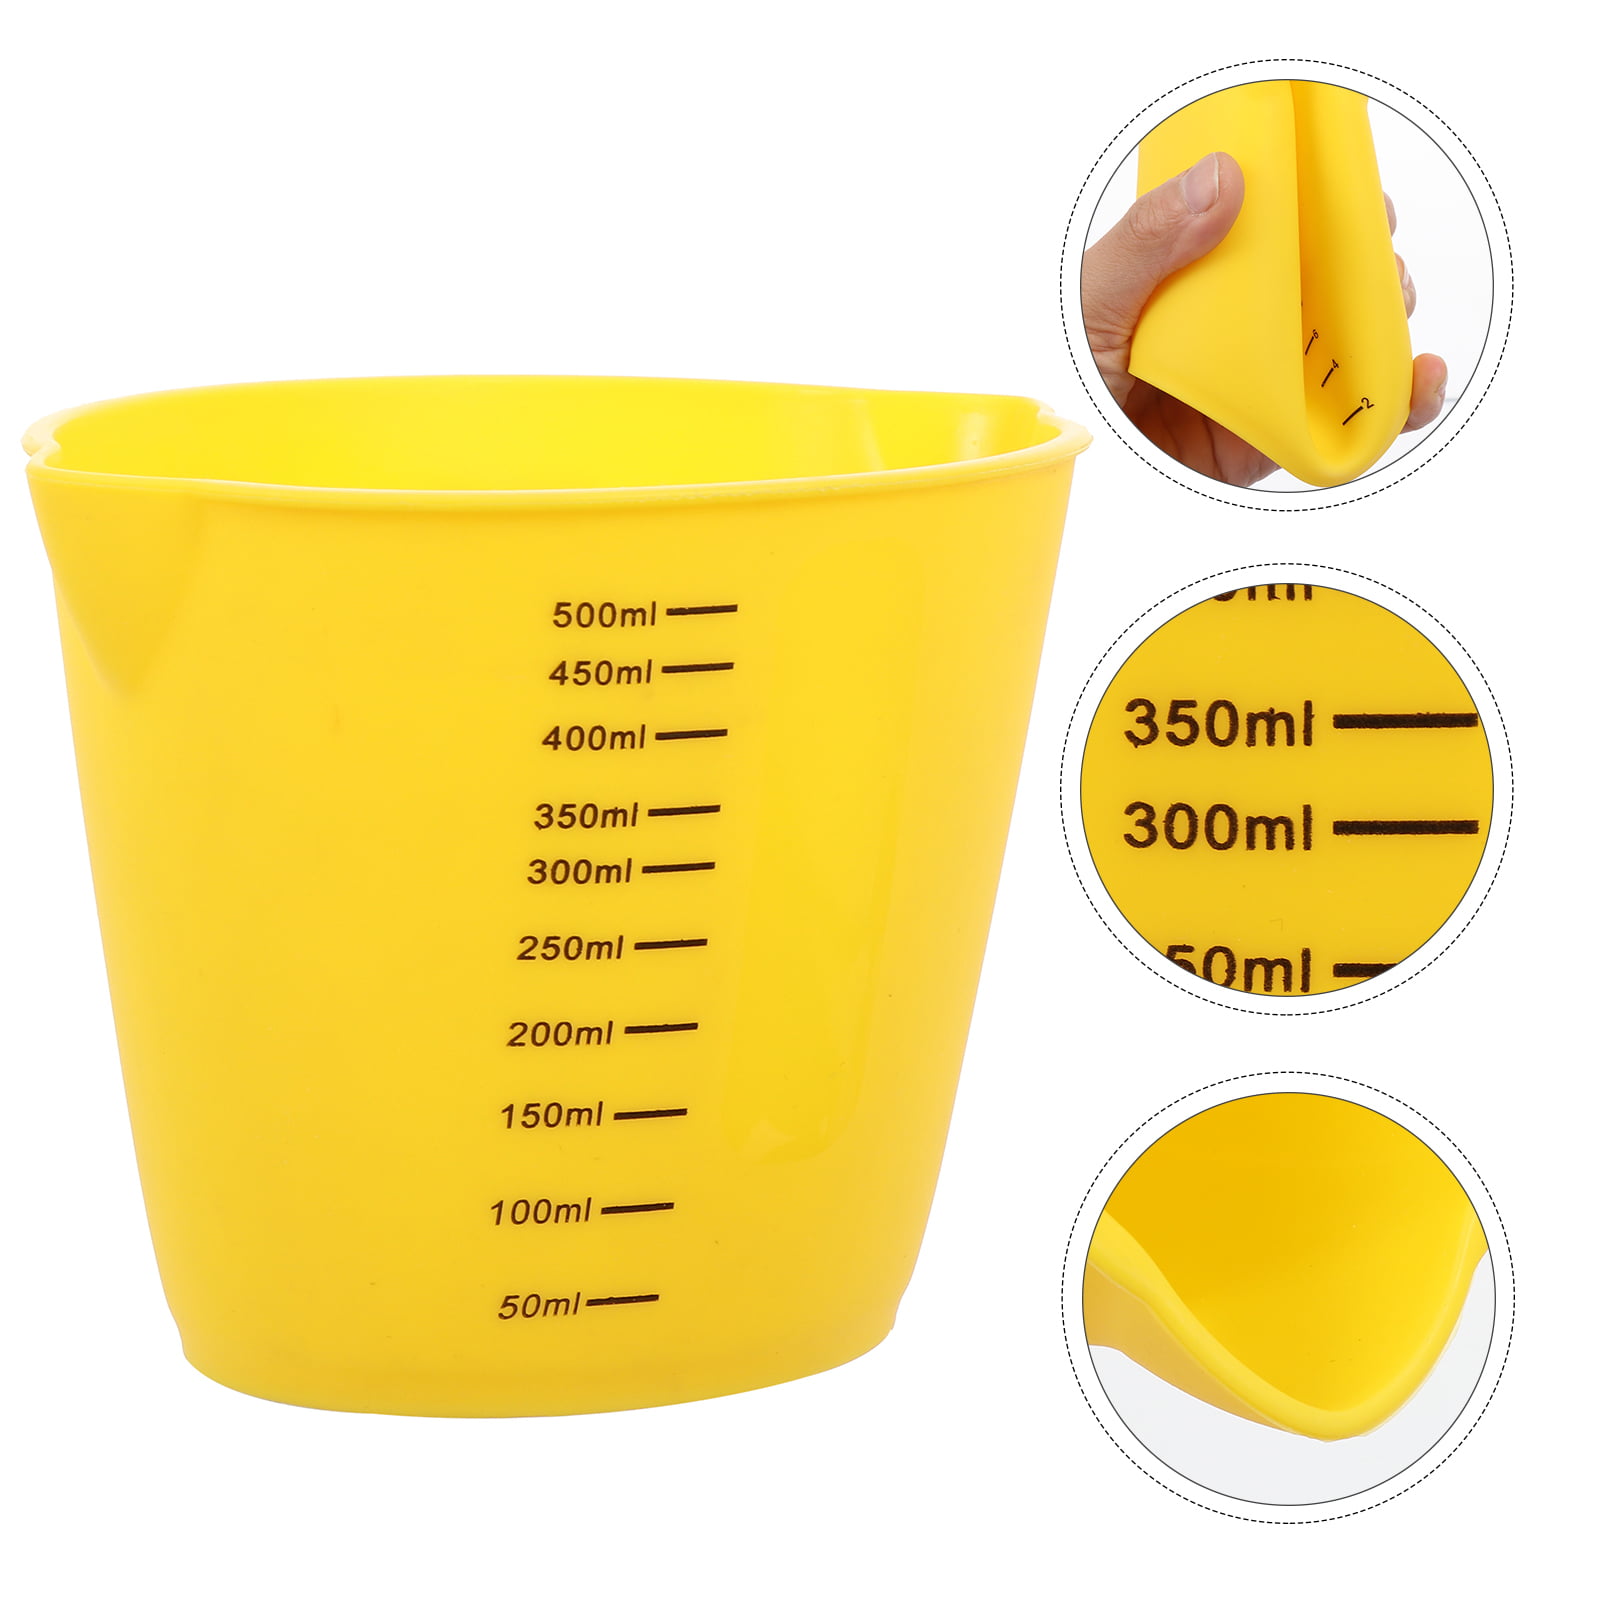 Magic Resin | 2 x 500ml & 2 x 250ml | Silicone Measuring Cups | Premium Quality & Non-Stick | Great for Epoxy Resin Mixing | BPA Free & Microwave